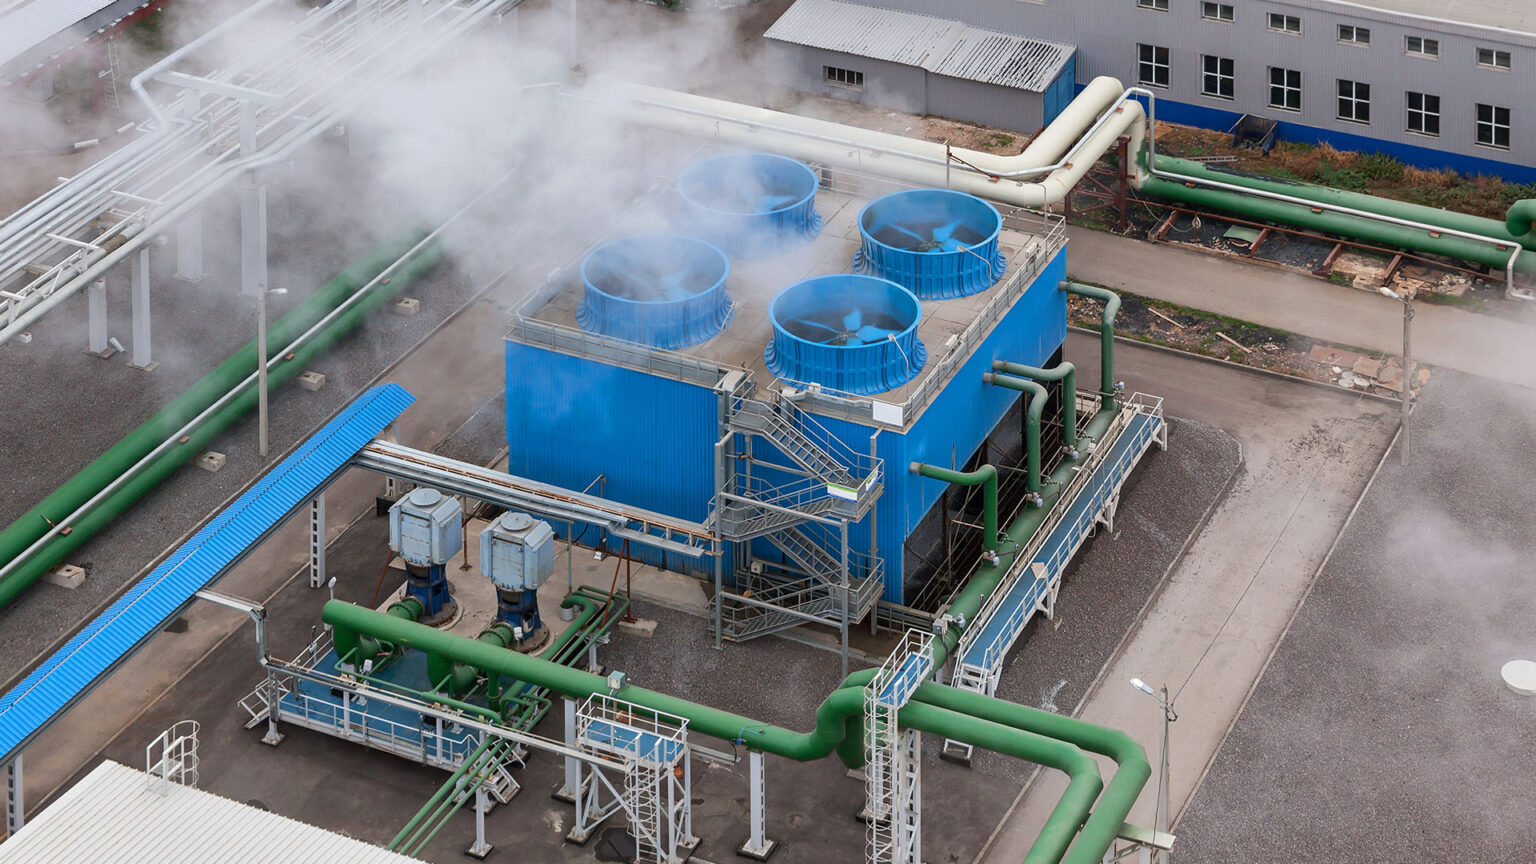 EX_ProcessCooling_industrial-blue-cooling-tower